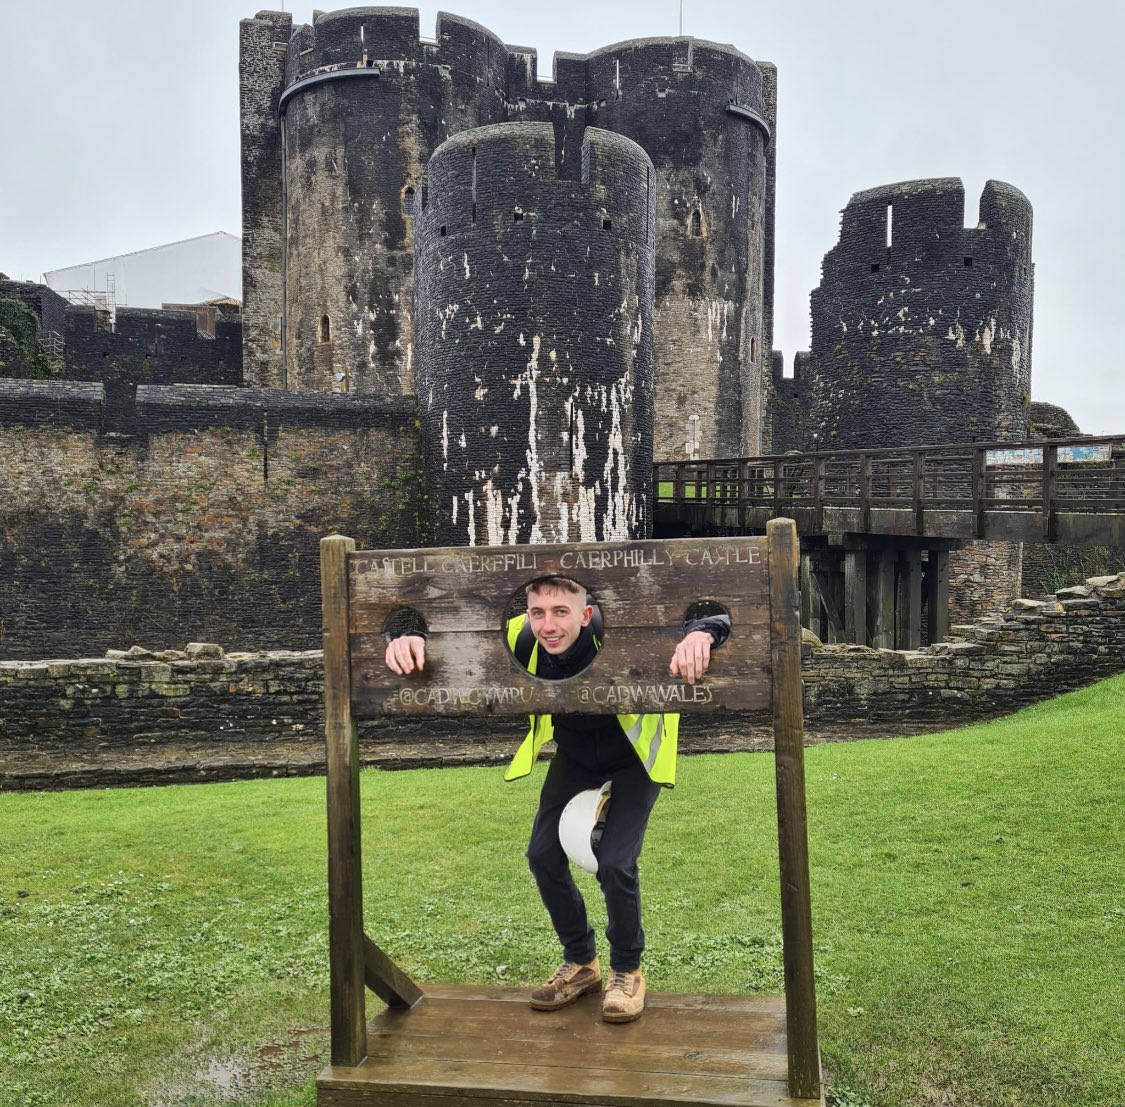 Fascinating site visits to our latest heritage project at Caerphilly Castle. Looking forward to bringing our expertise & high-quality workmanship to deliver the exhibition fit out within this impressive historical landmark.